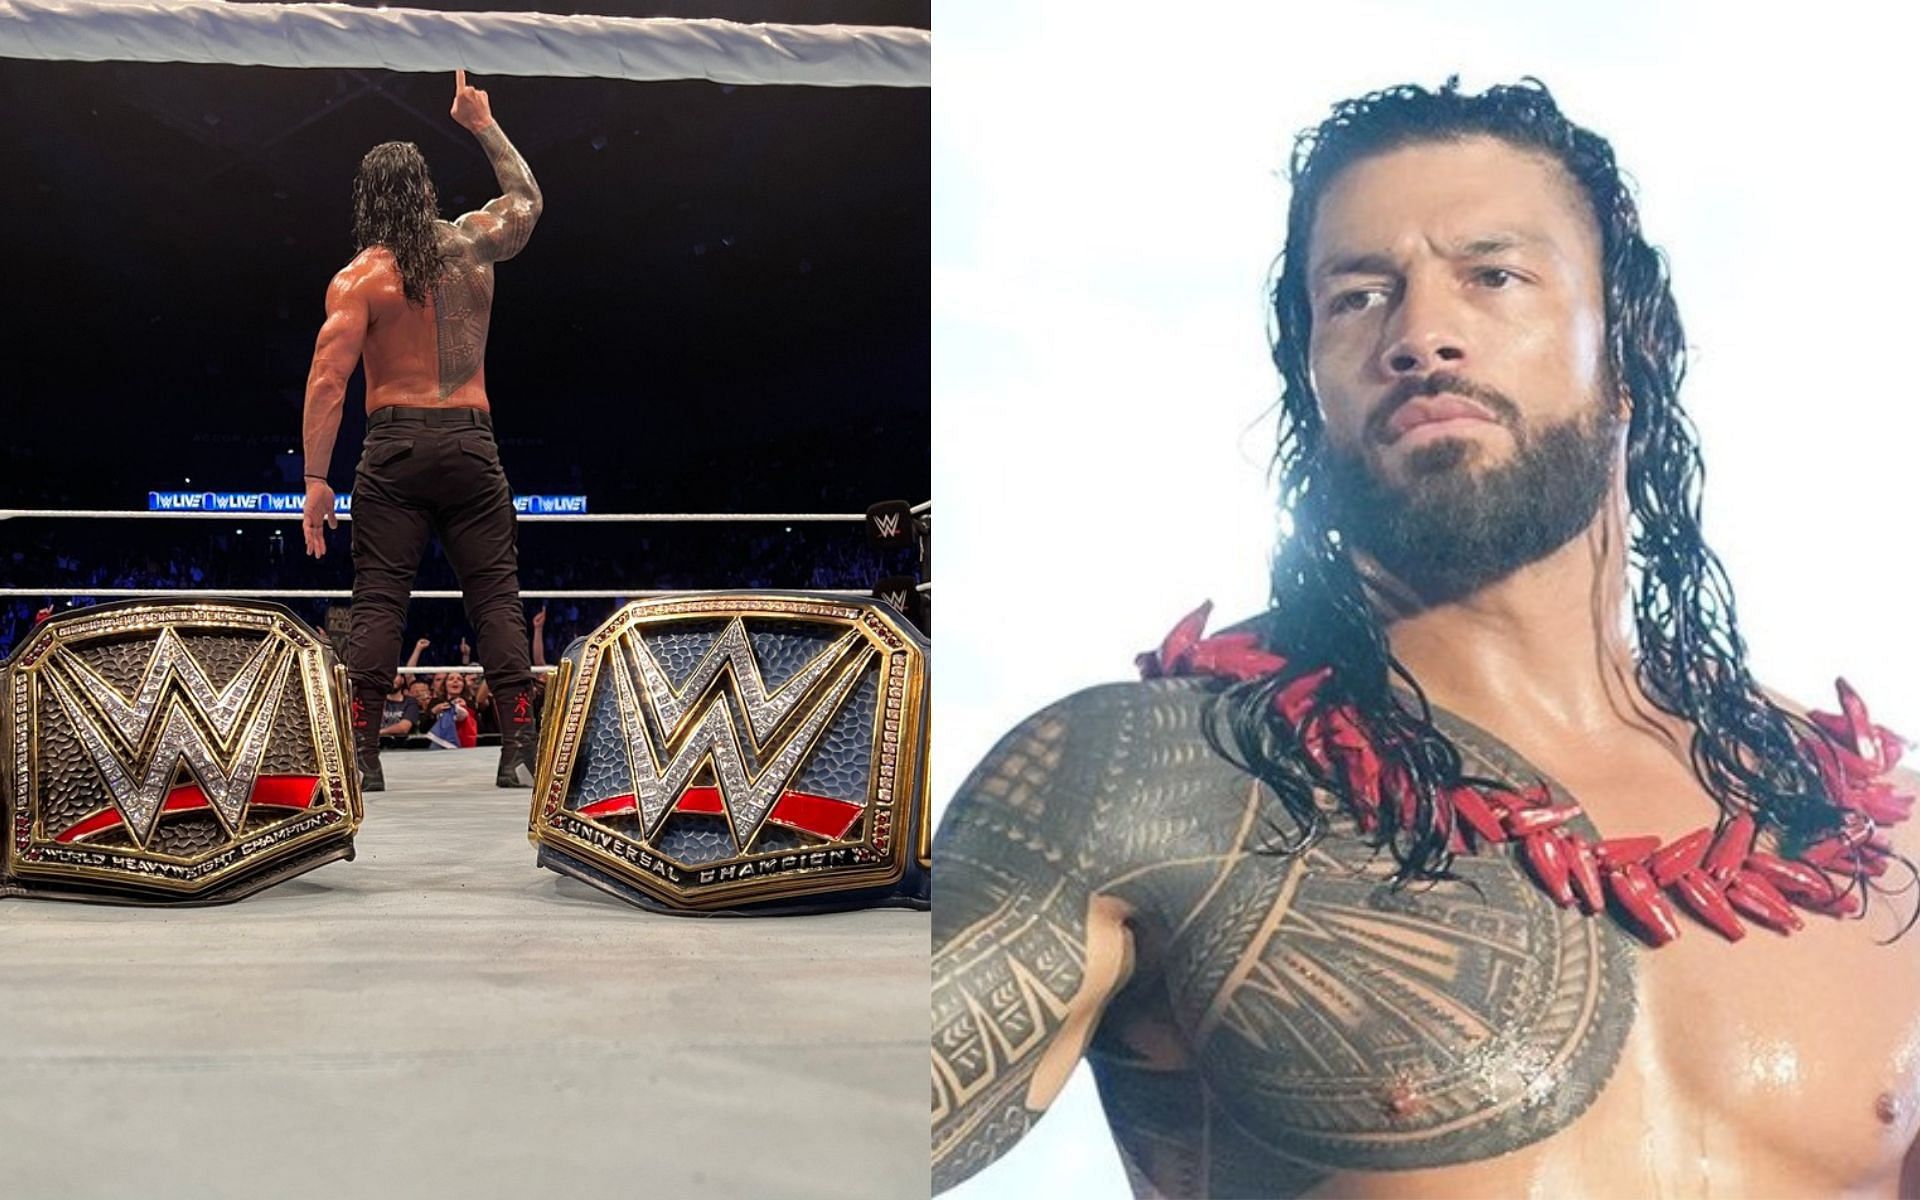 Roman Reigns has accomplished multiple accolades on WWE